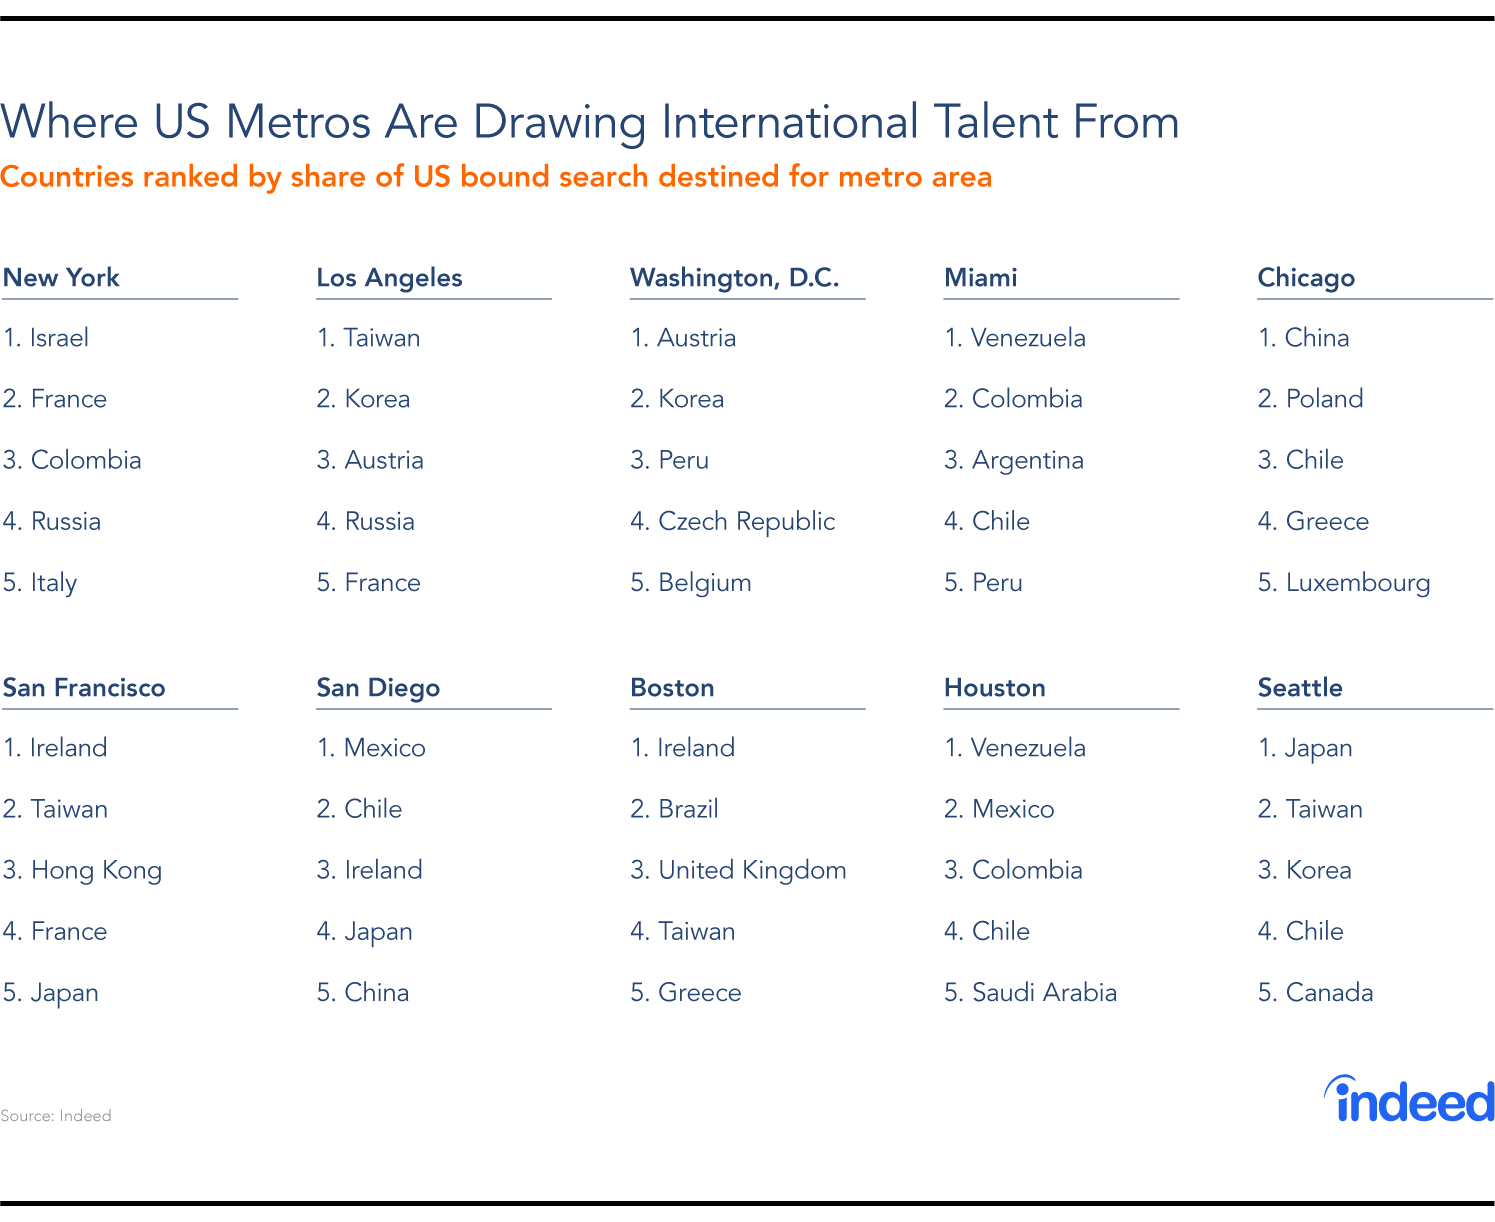 Where US metros are drawing international talent from